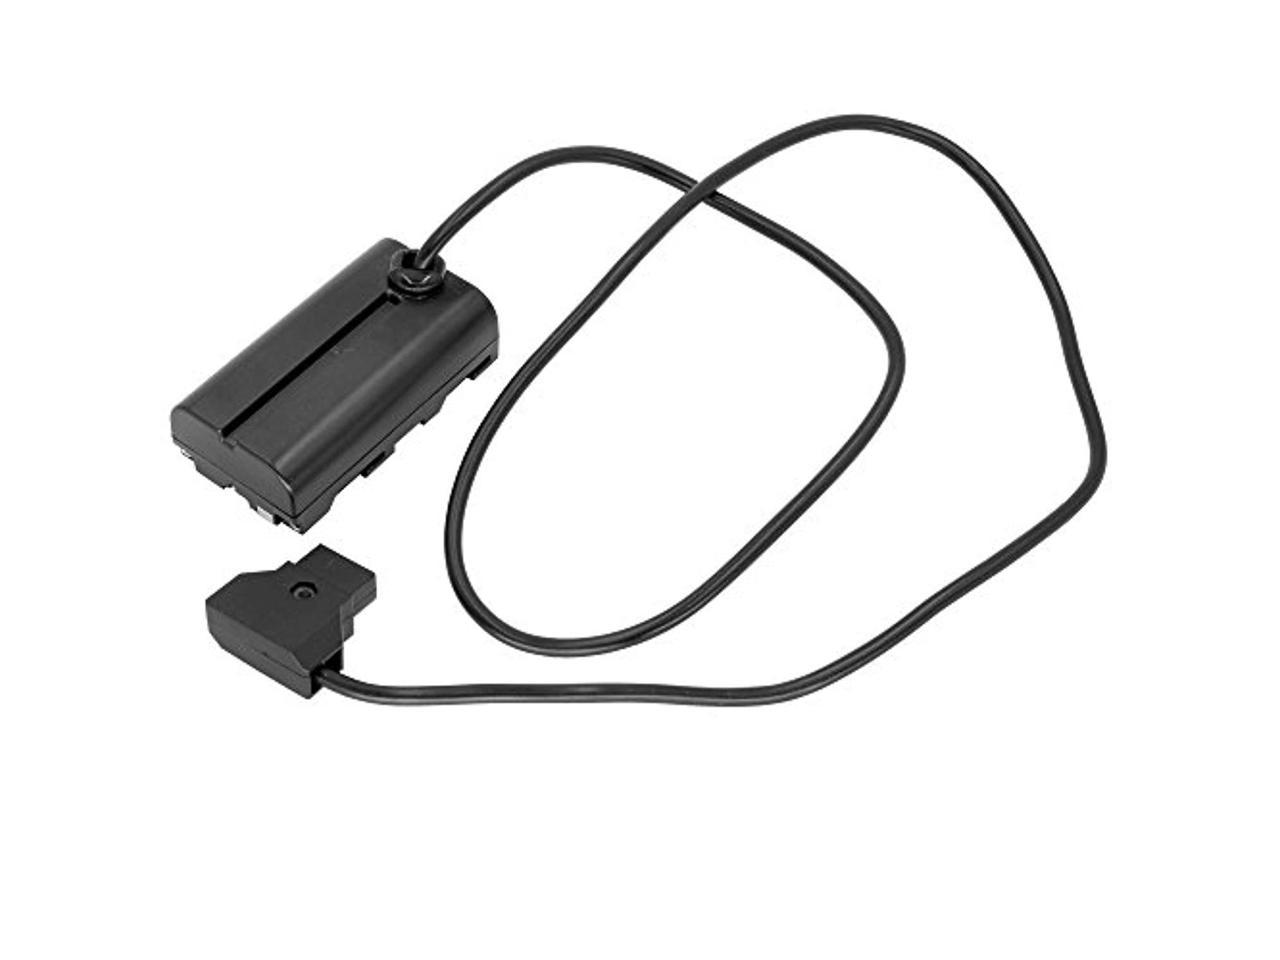 abort ensom vold gyrovu high power (4.5a) d-tap to dummy battery 30? straight adapter cable  to replace np-f550, np-f570, np-f970 sony-l batteries to power dcrvx2100,  hdrfx1, hd1000u & hvrz1u camera - Newegg.com